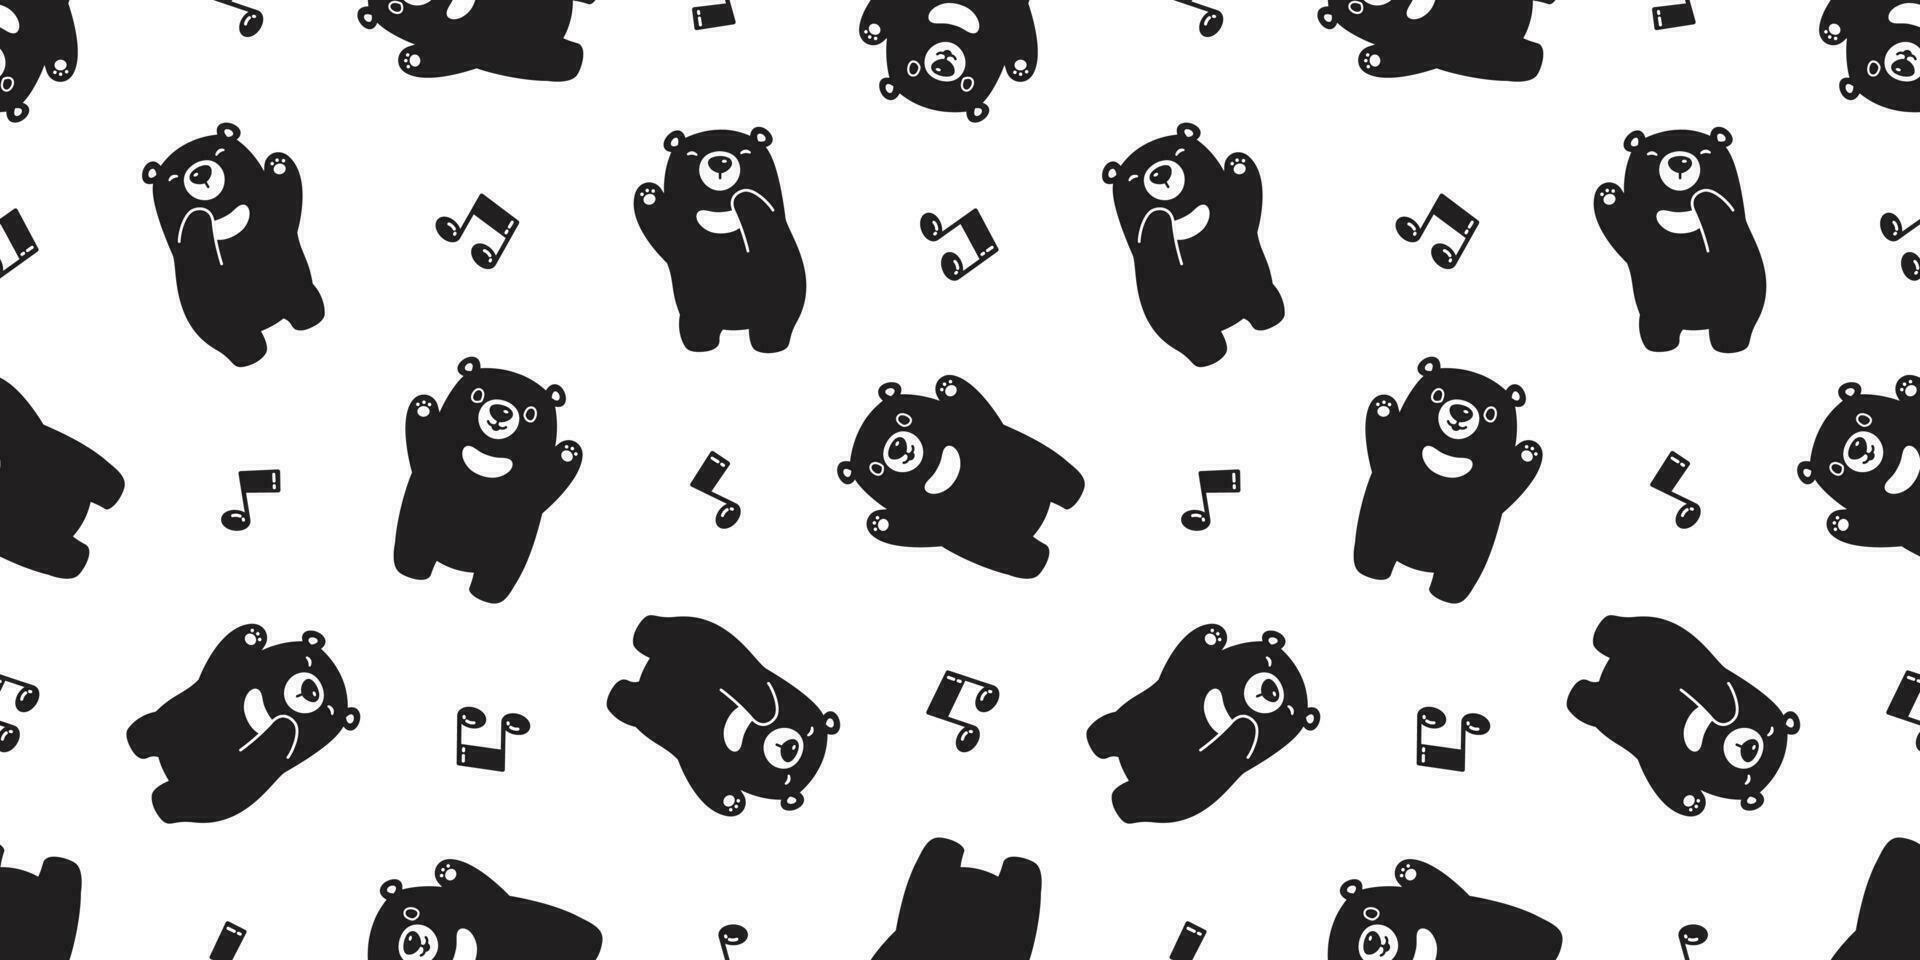 Bear seamless pattern vector Polar Bear singing song music note dancing cartoon scarf isolated tile background repeat wallpaper gift wrap black